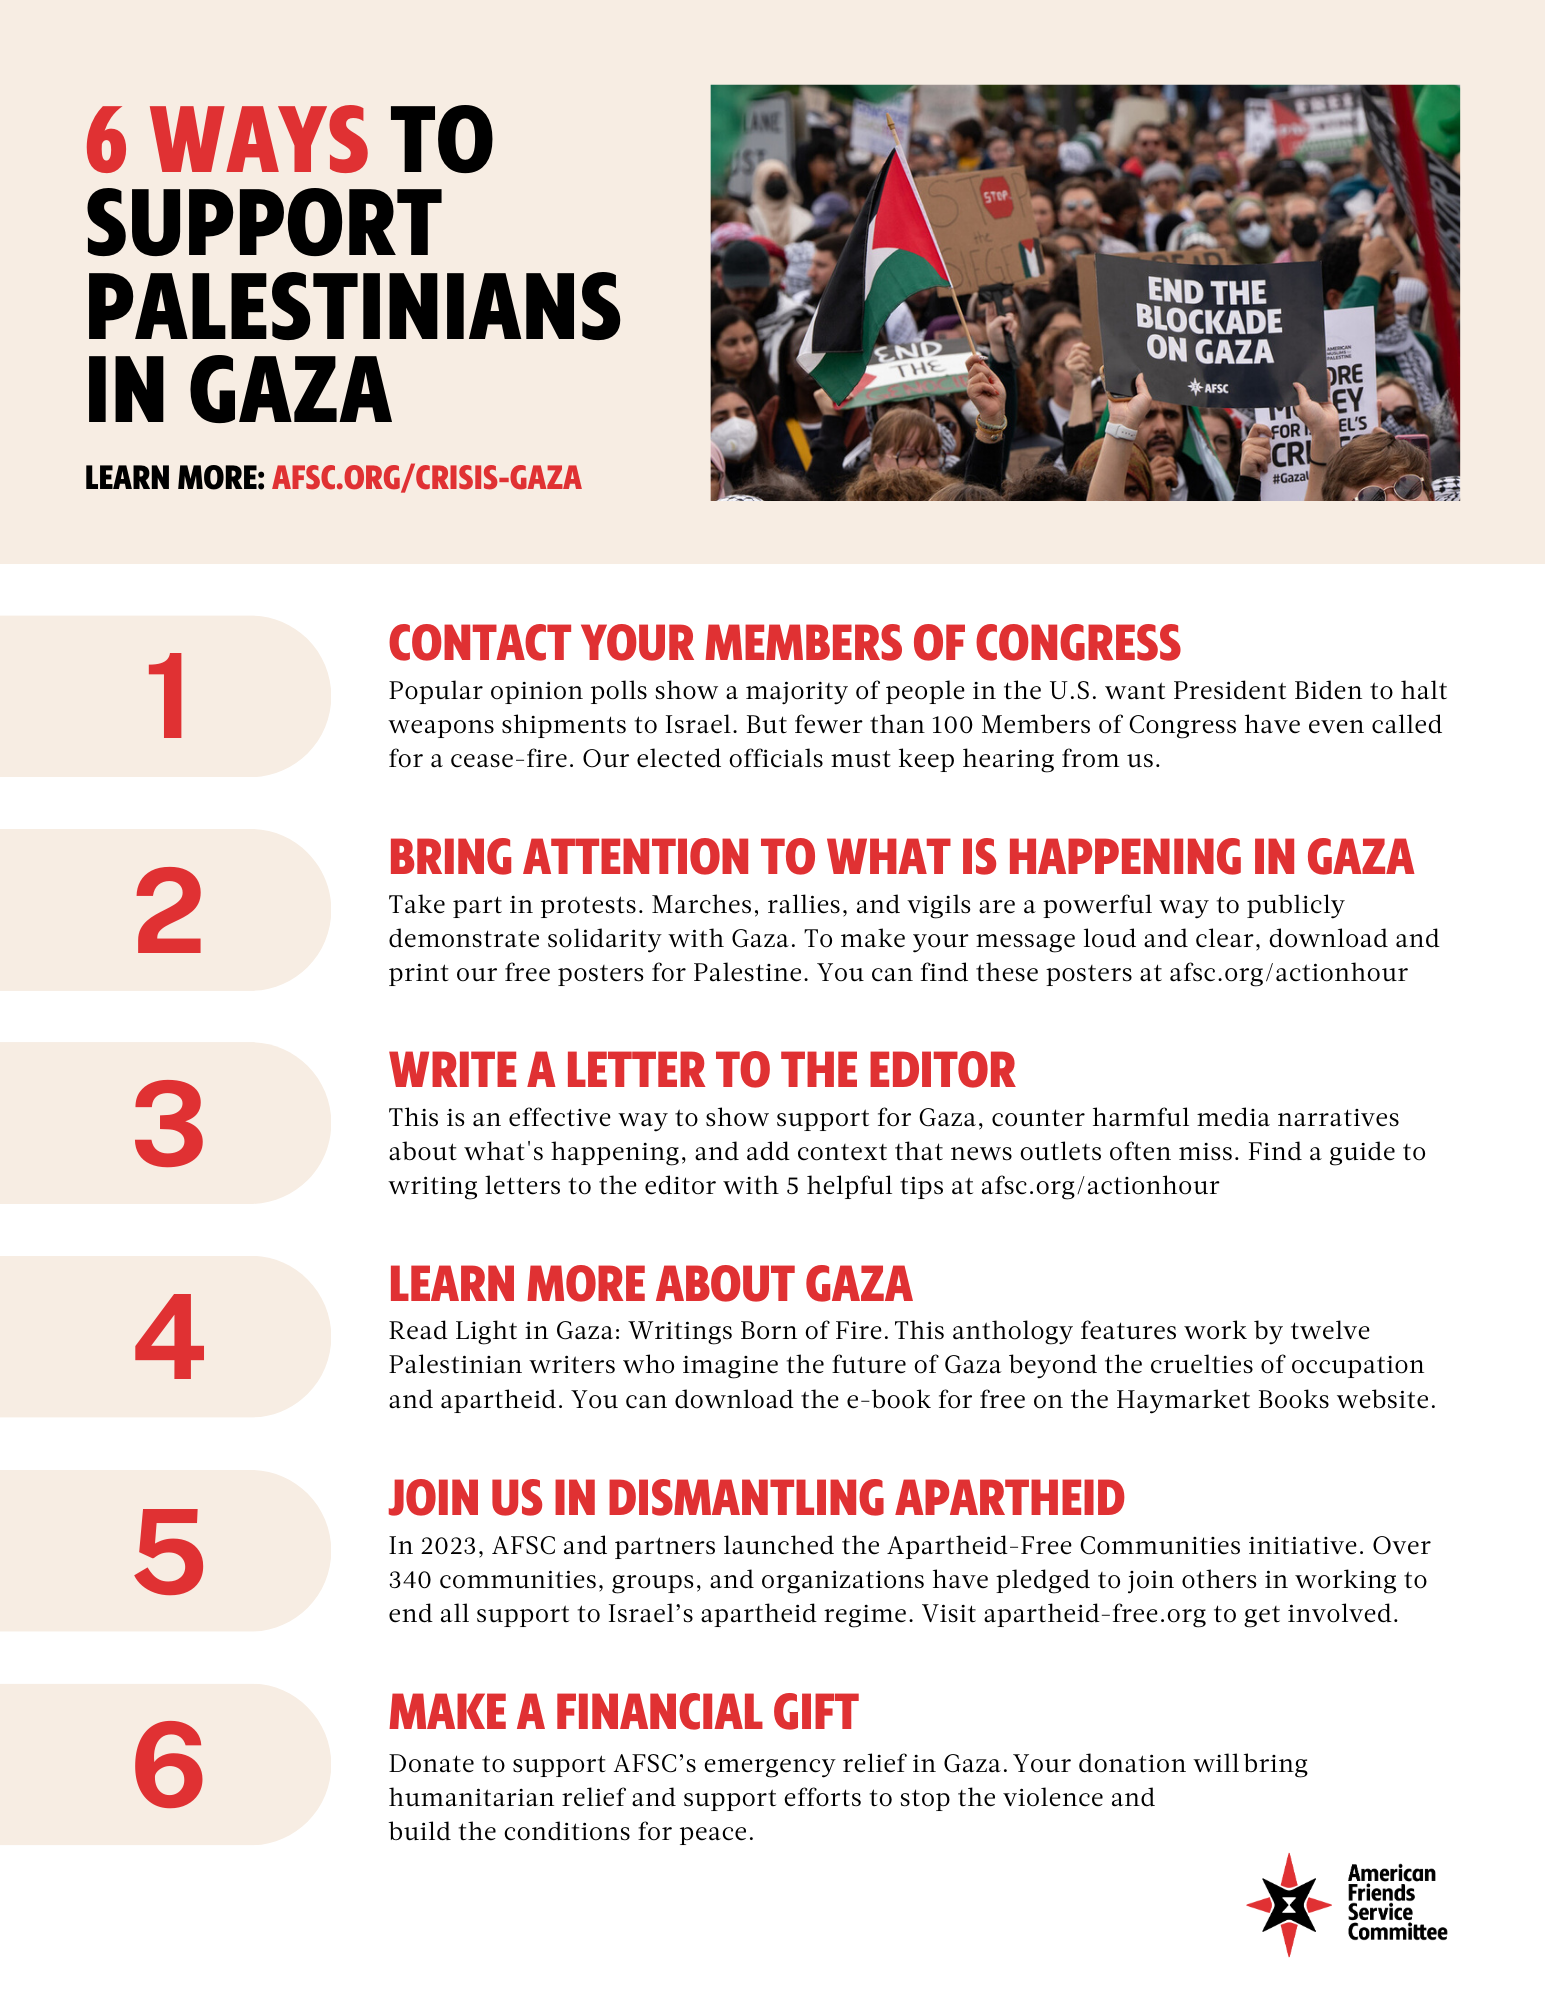 6 Ways to Support Palestinians in Gaza